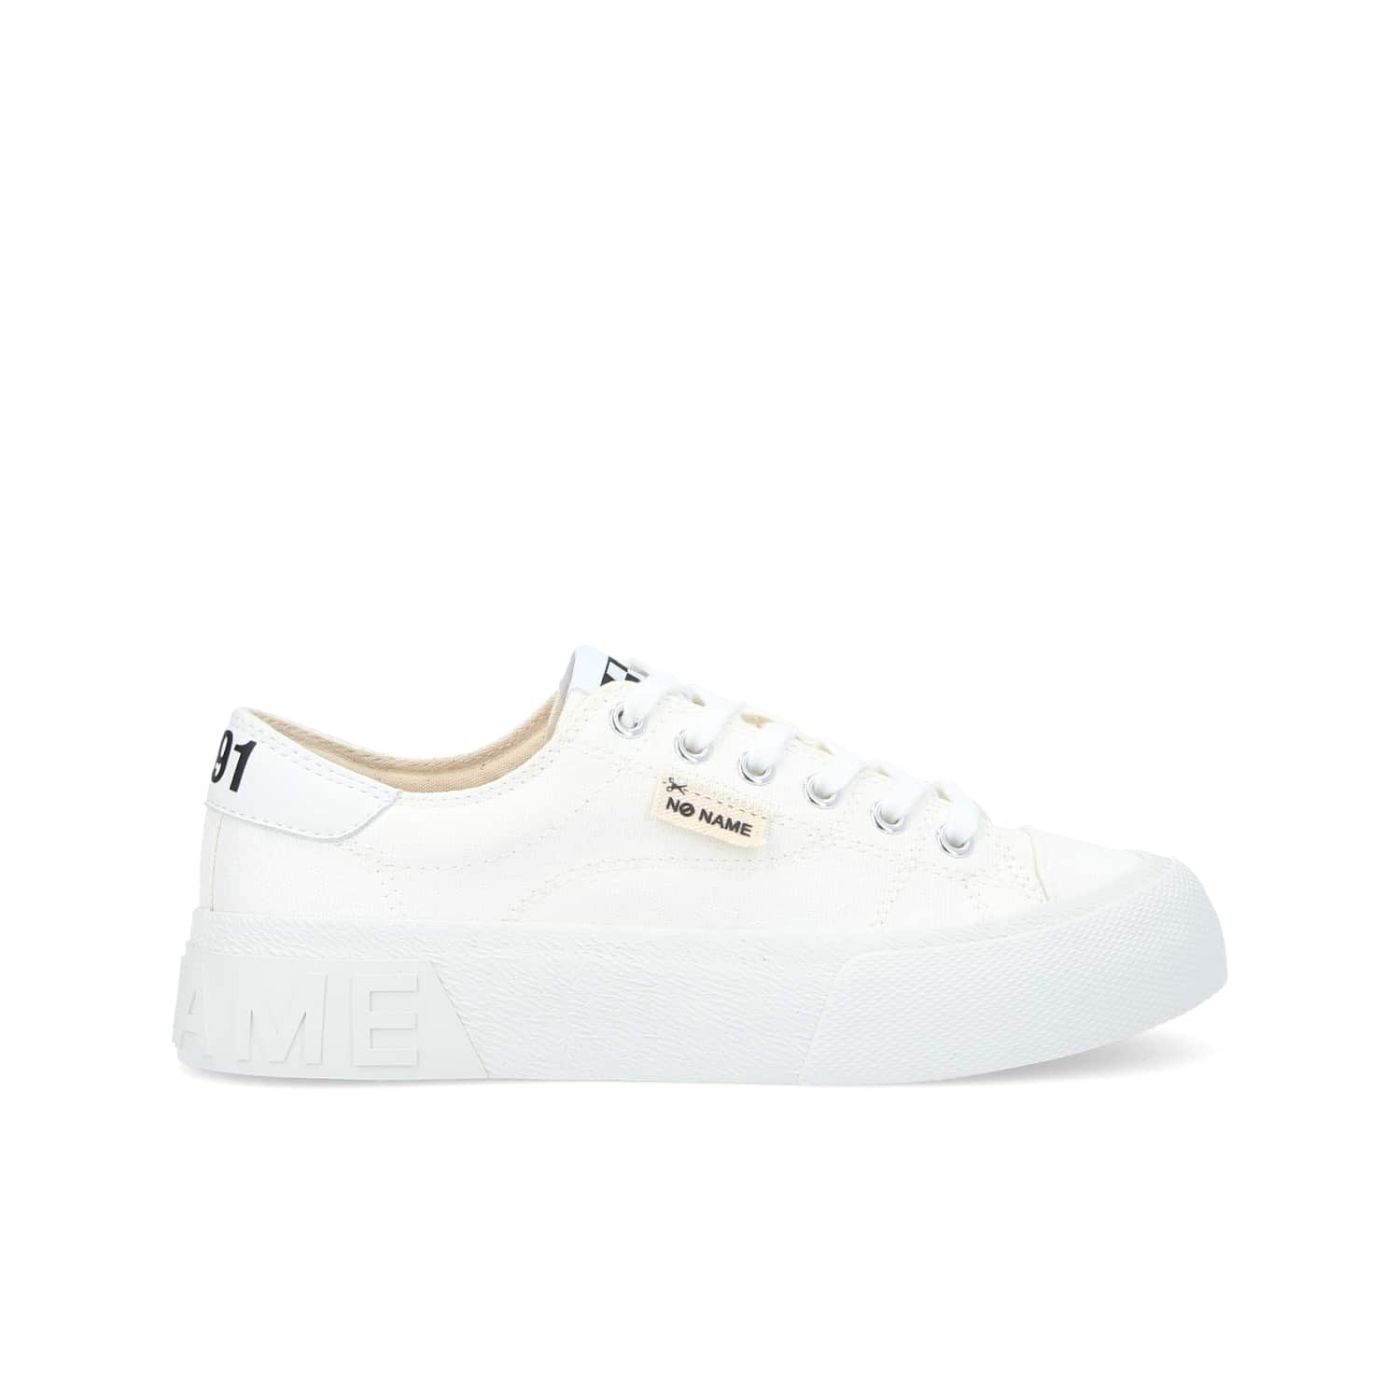 RESET SNEAKER W - CANVAS RECYCLED - WHITE